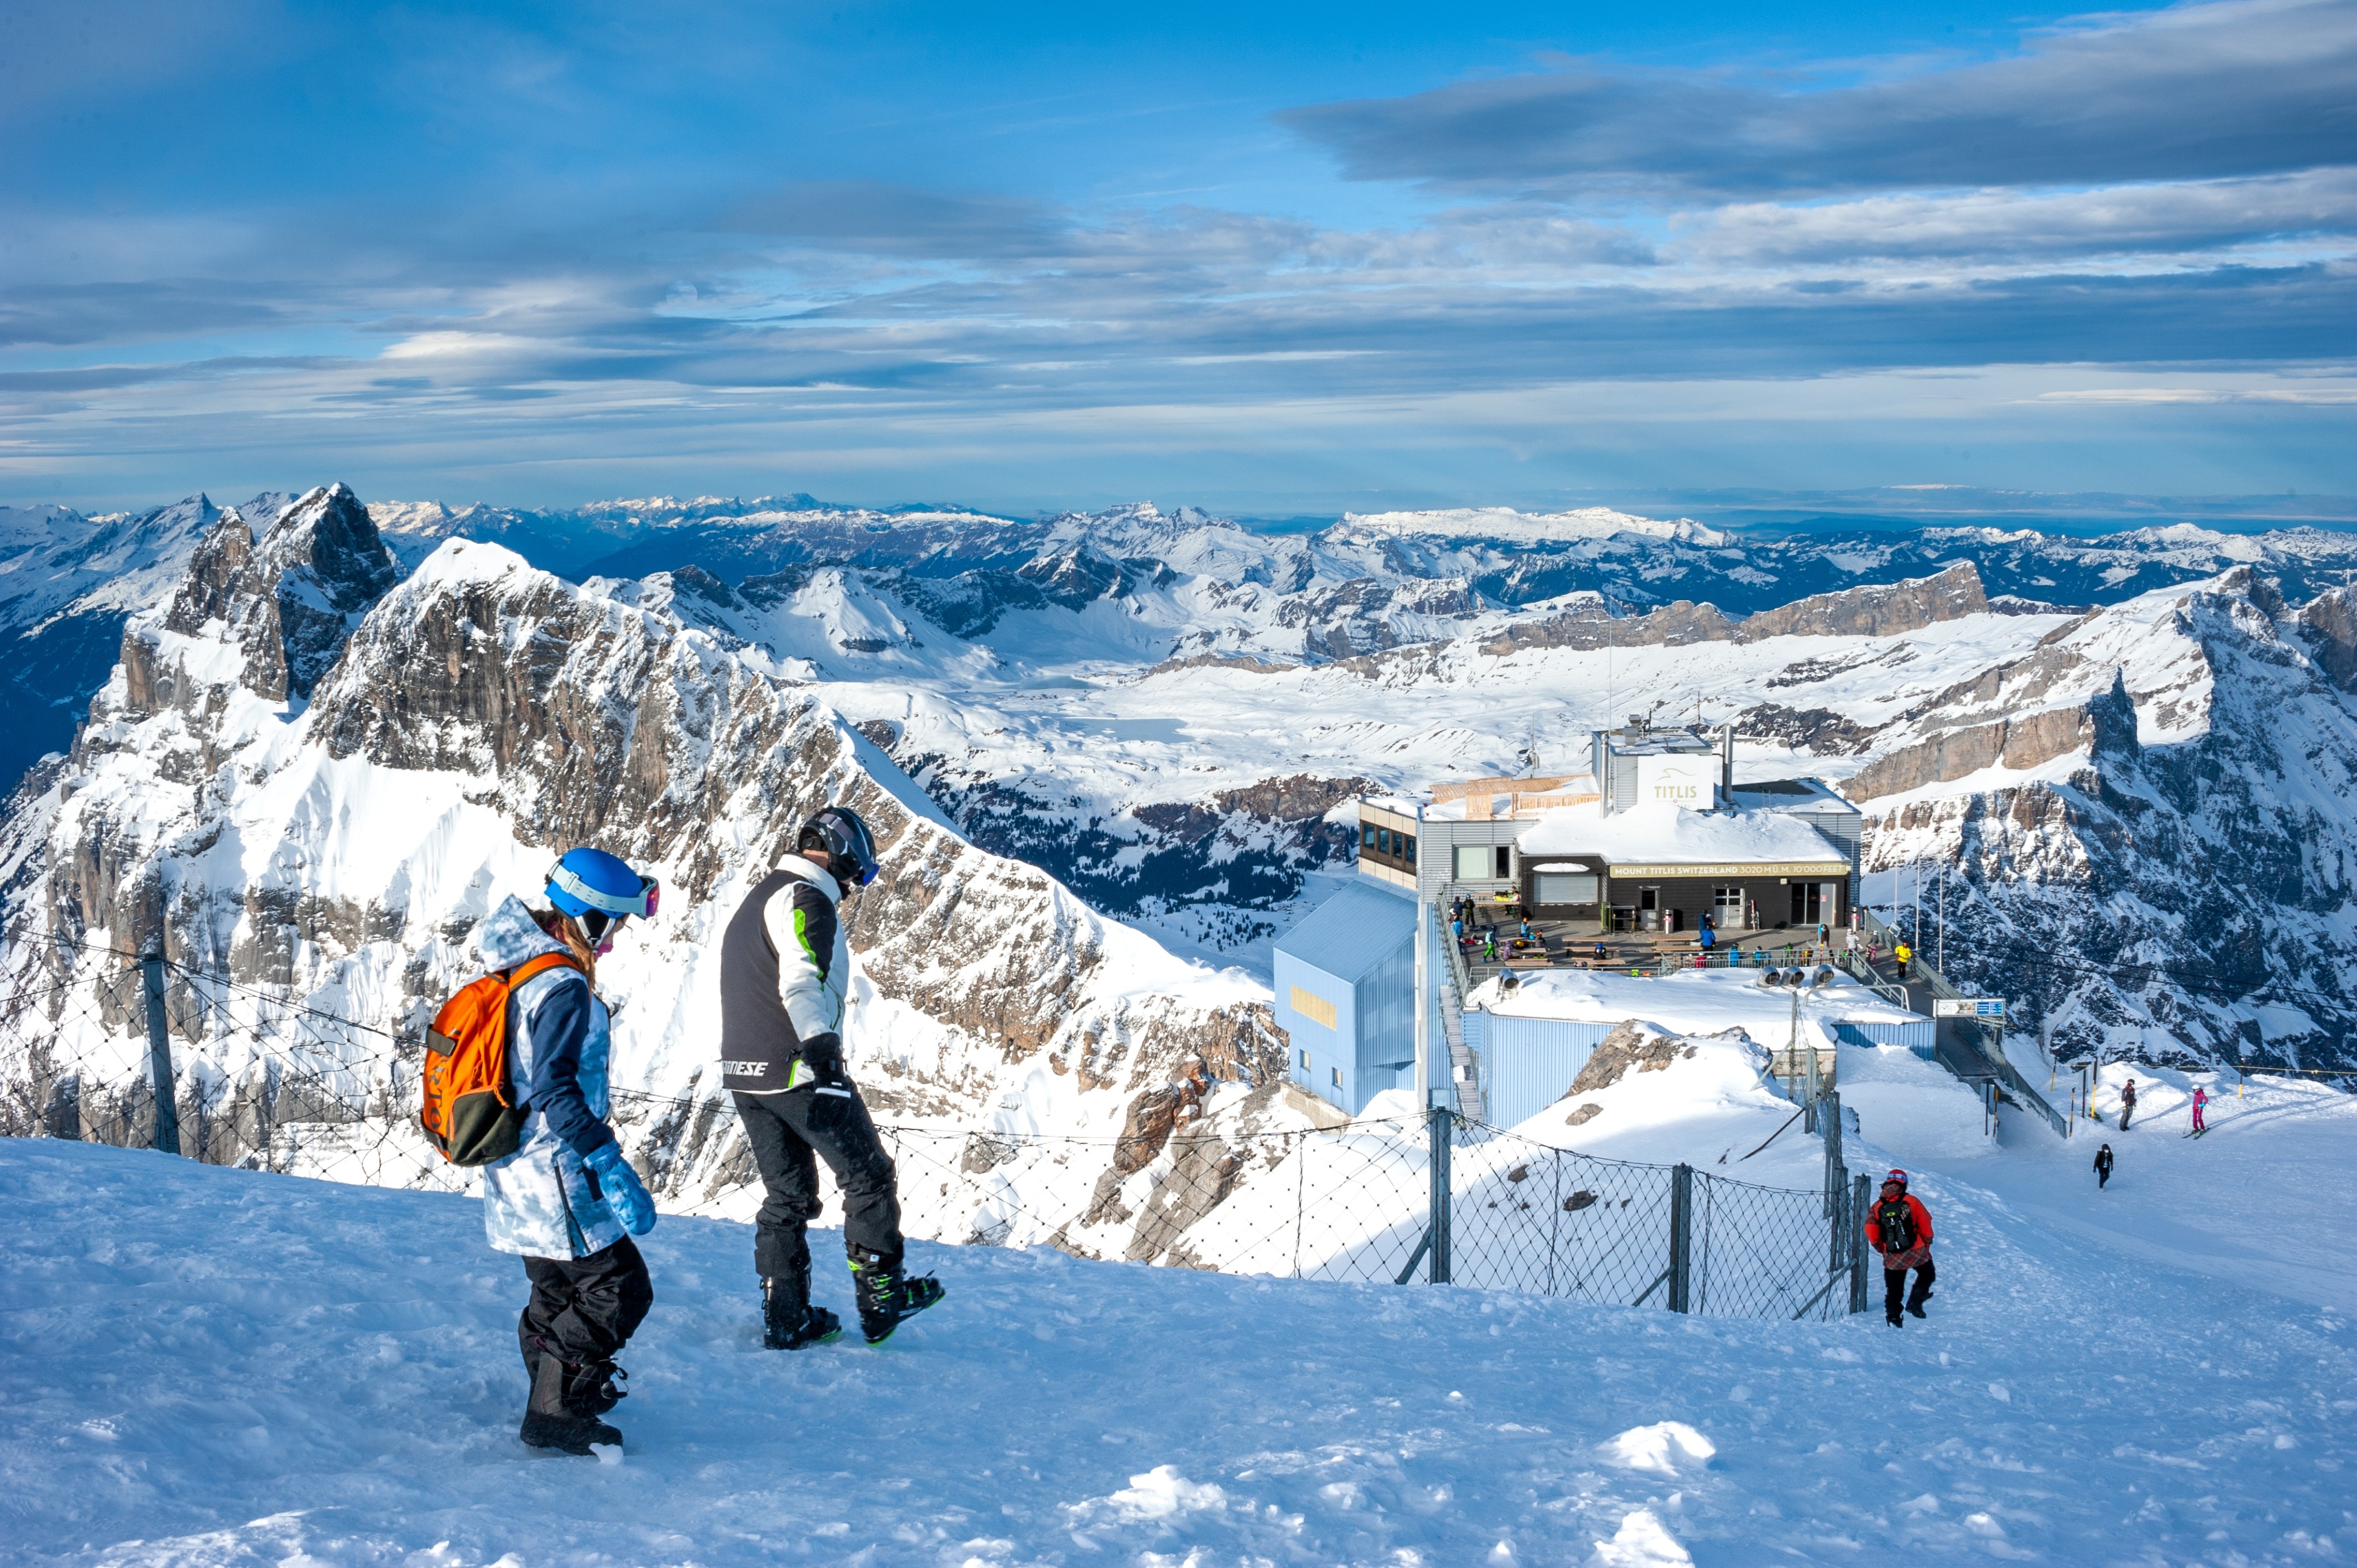 Skiers on Mount Titlis near Lucerne in Switzerland, which eagerly awaits the return of Chinese tourists. Photo: Shutterstock